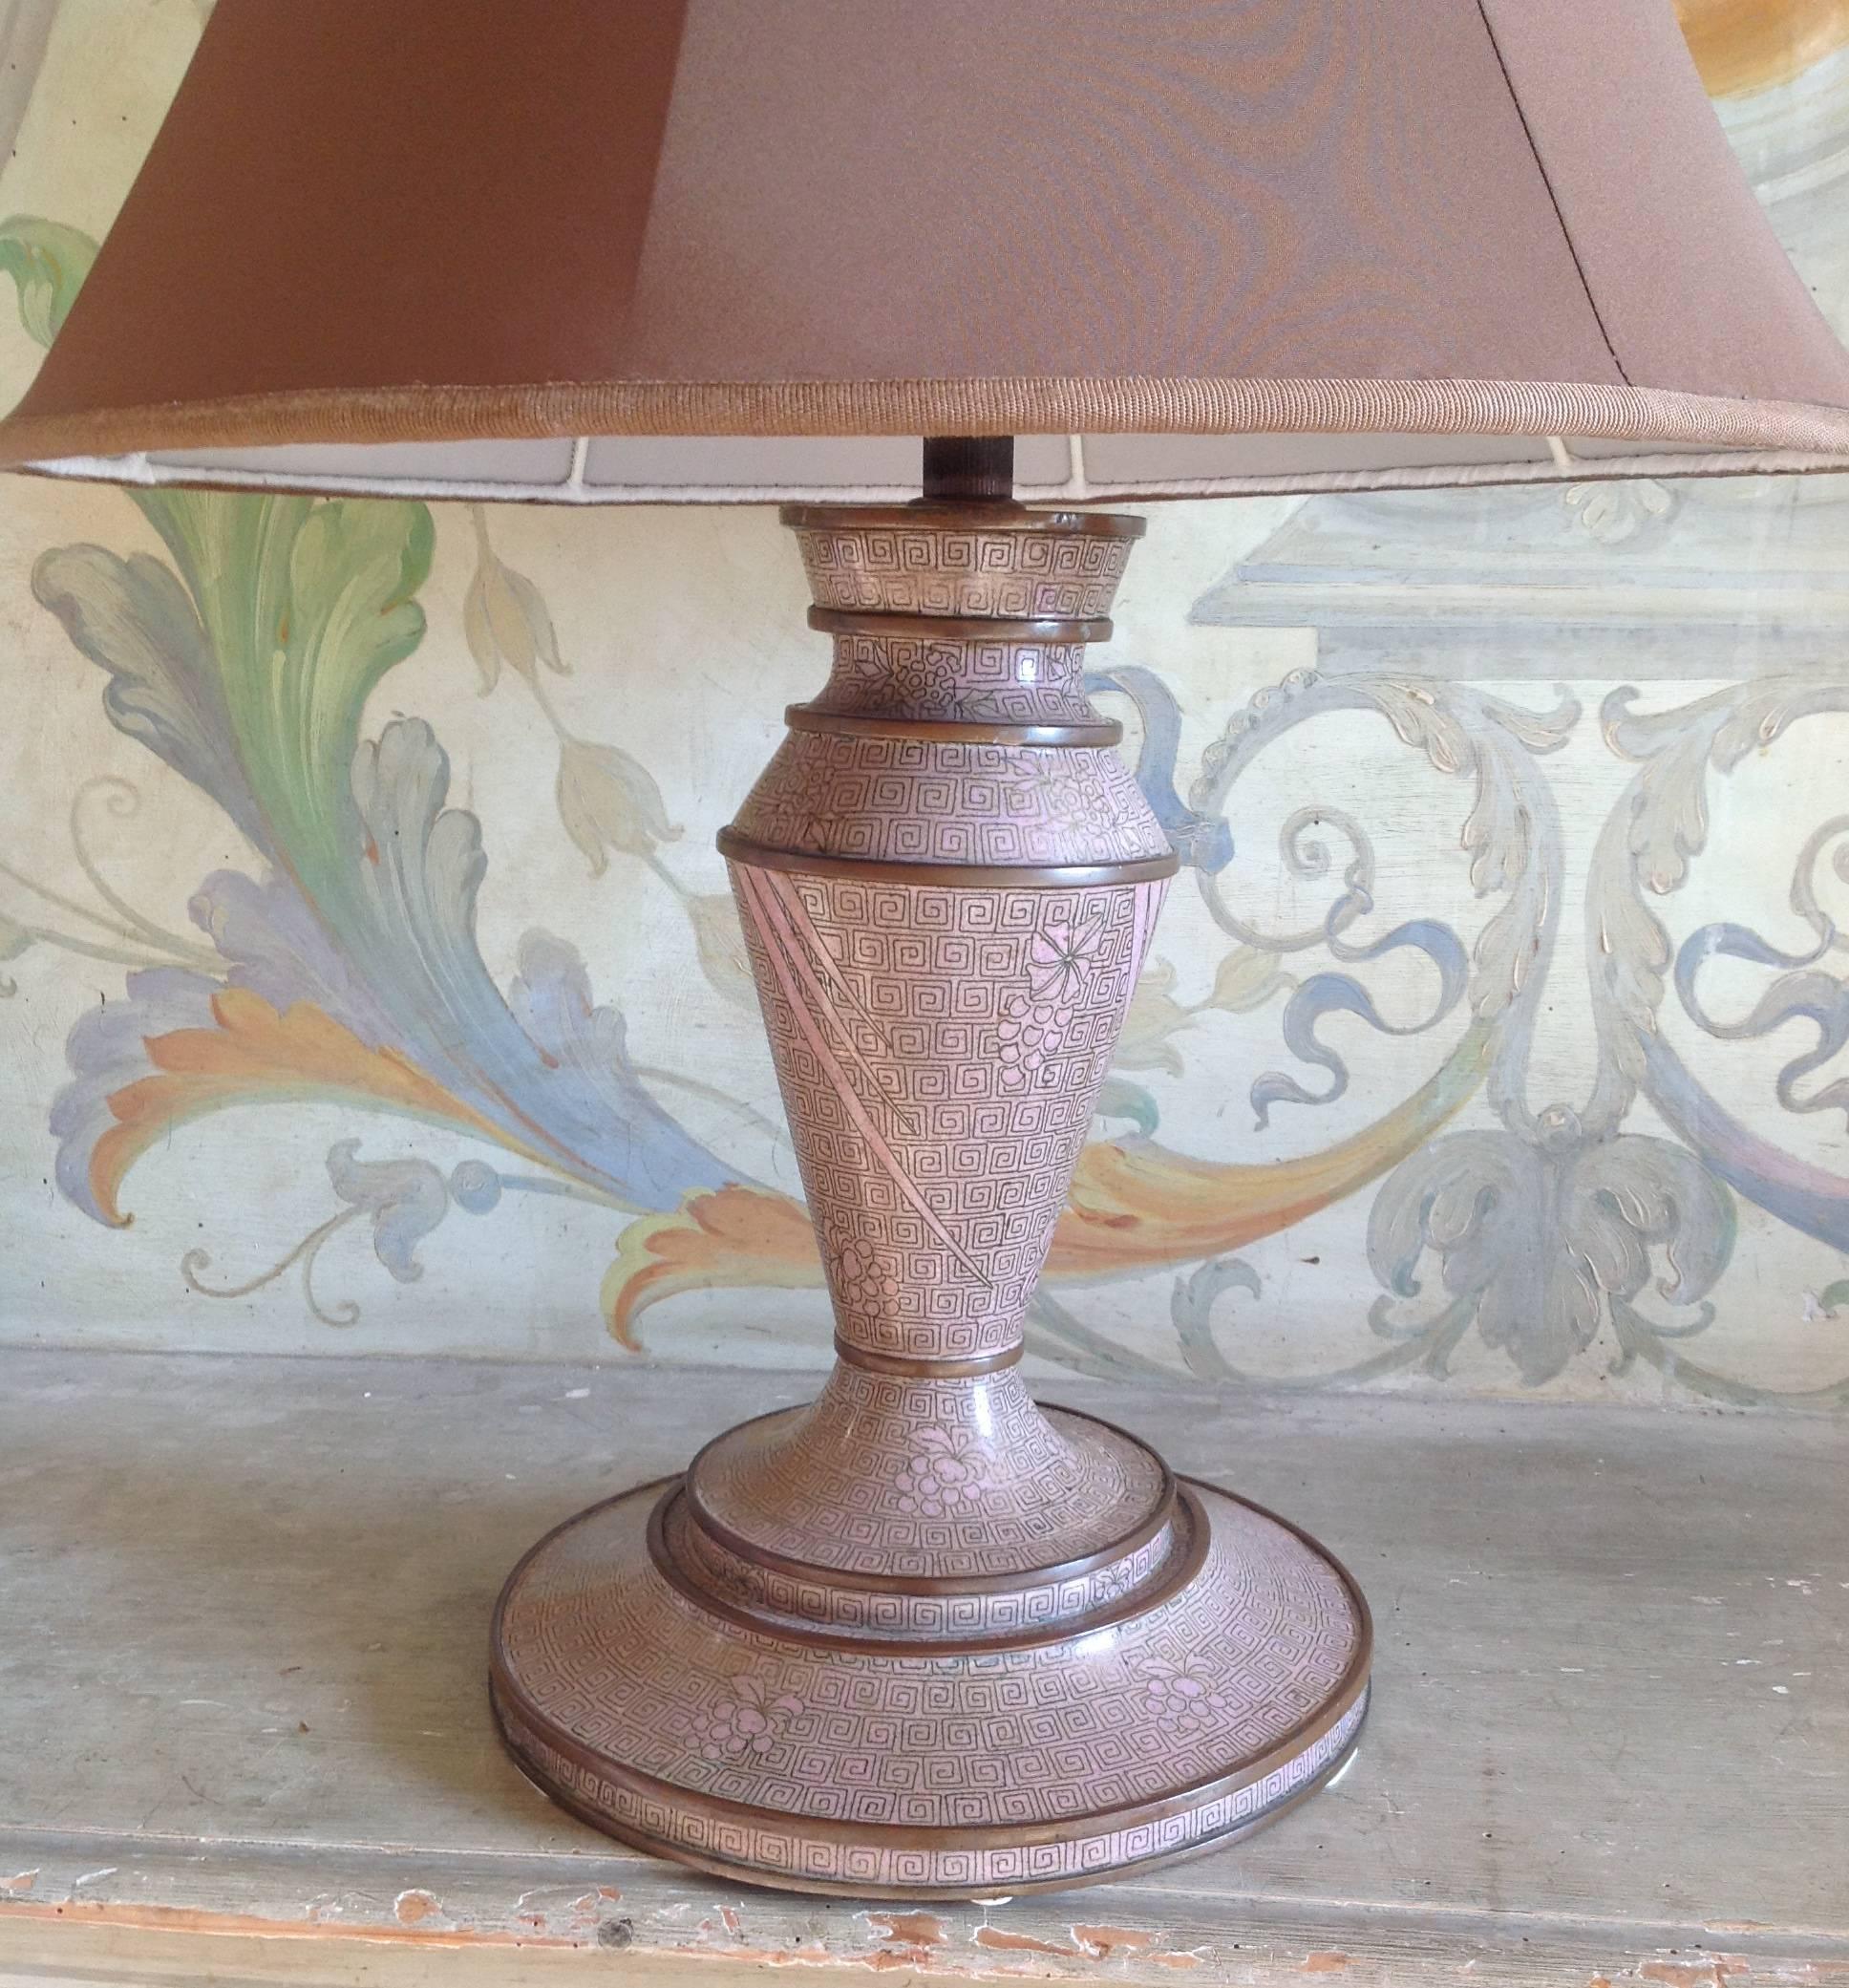 Elegant cloisonne table lamp,
Pink with brass details.